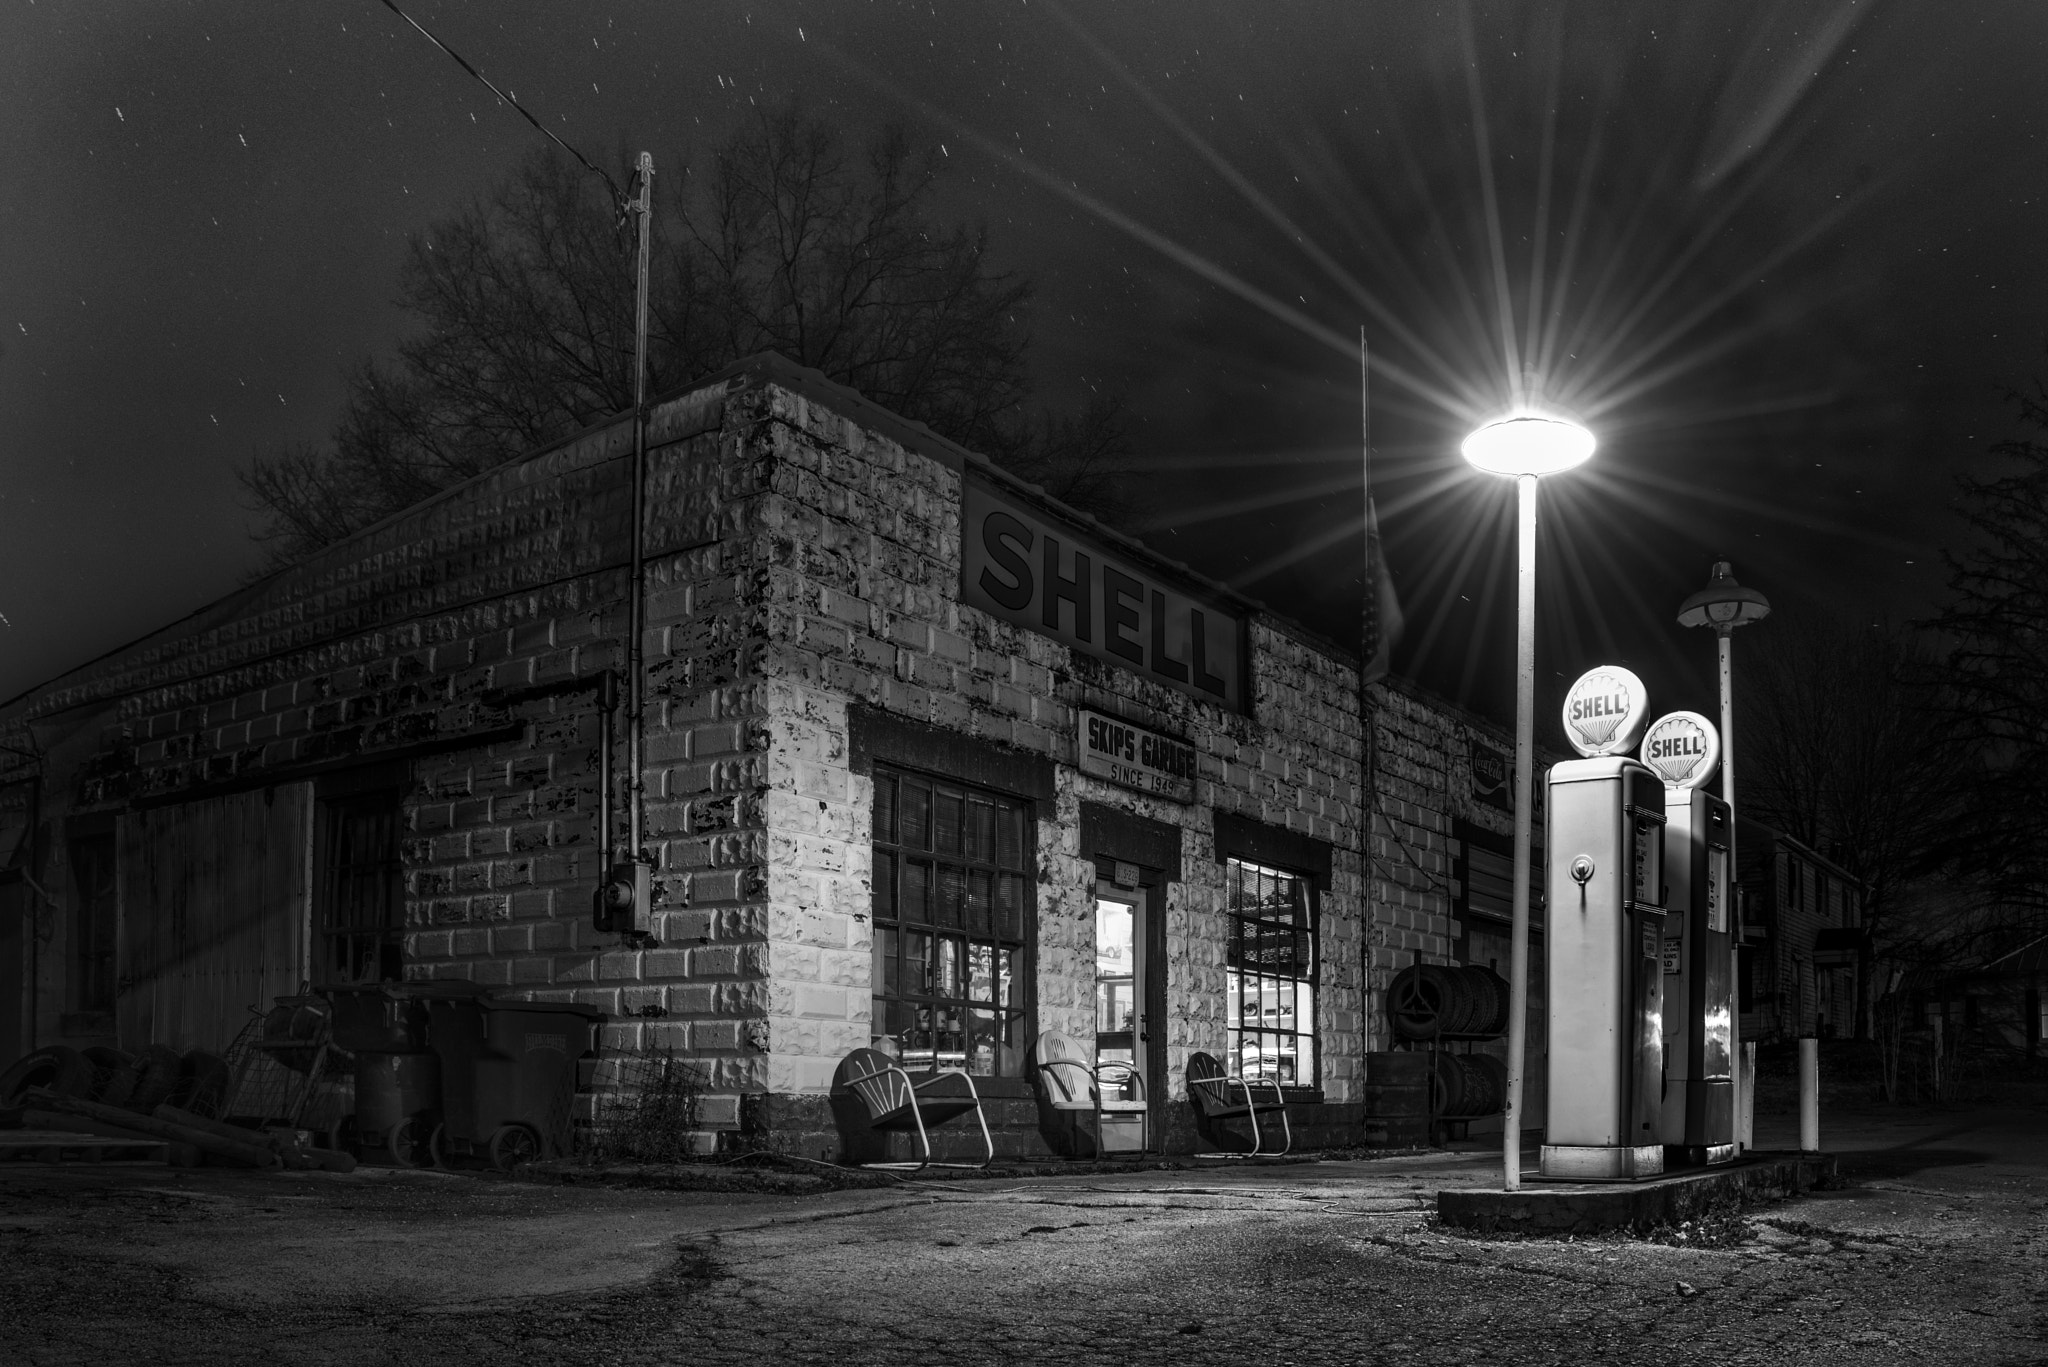 Nikon D600 sample photo. The old shell station photography